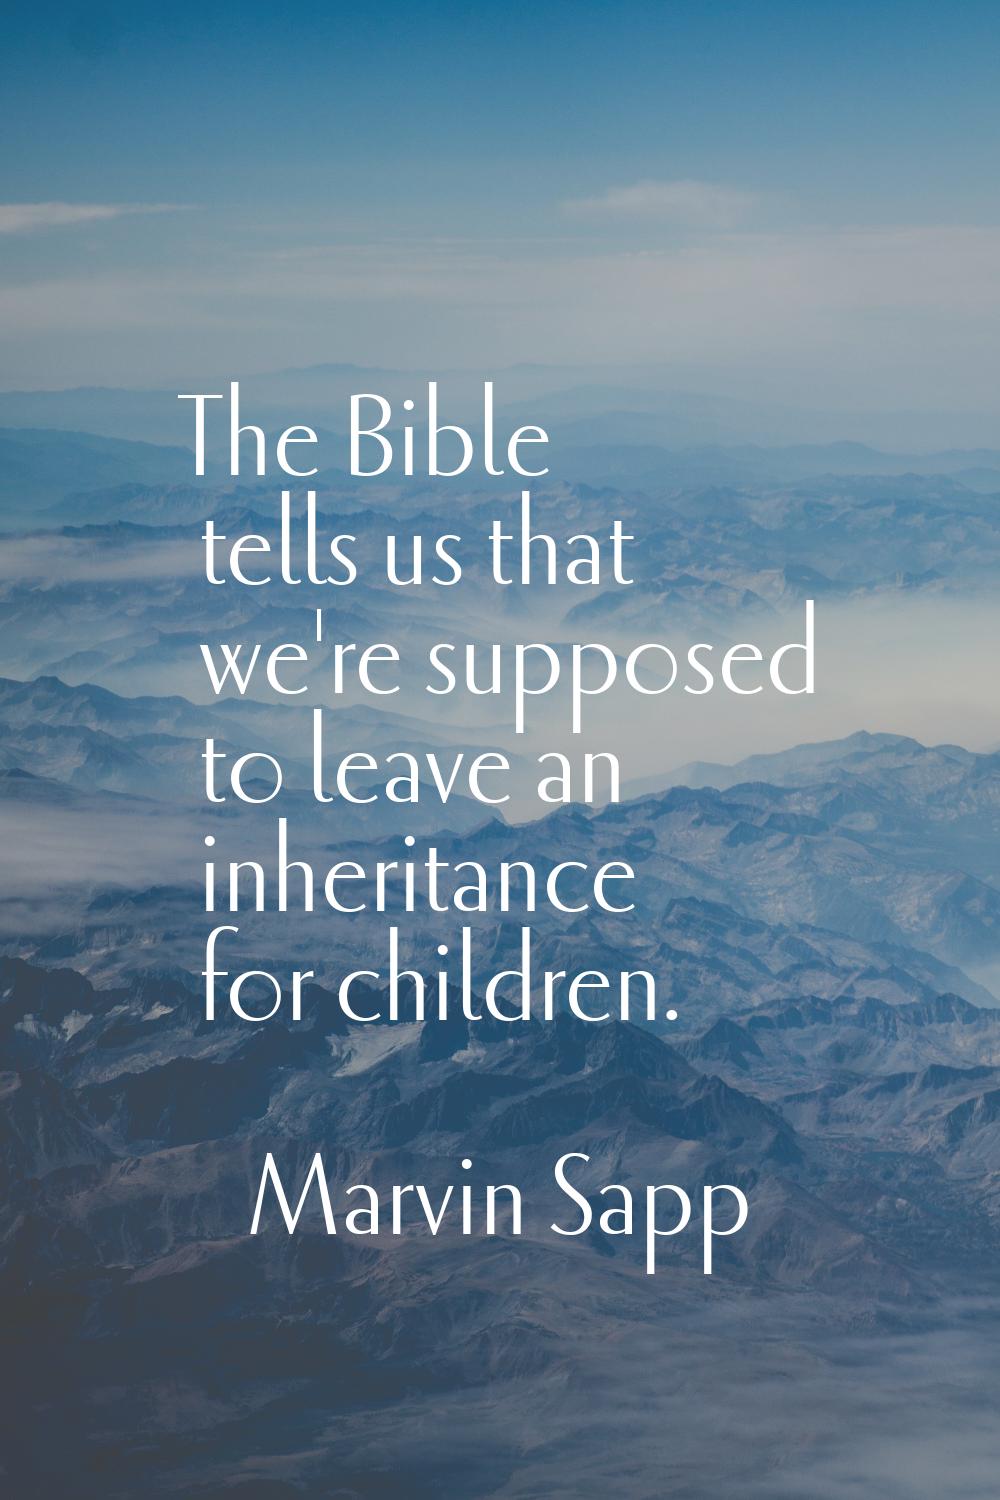 The Bible tells us that we're supposed to leave an inheritance for children.